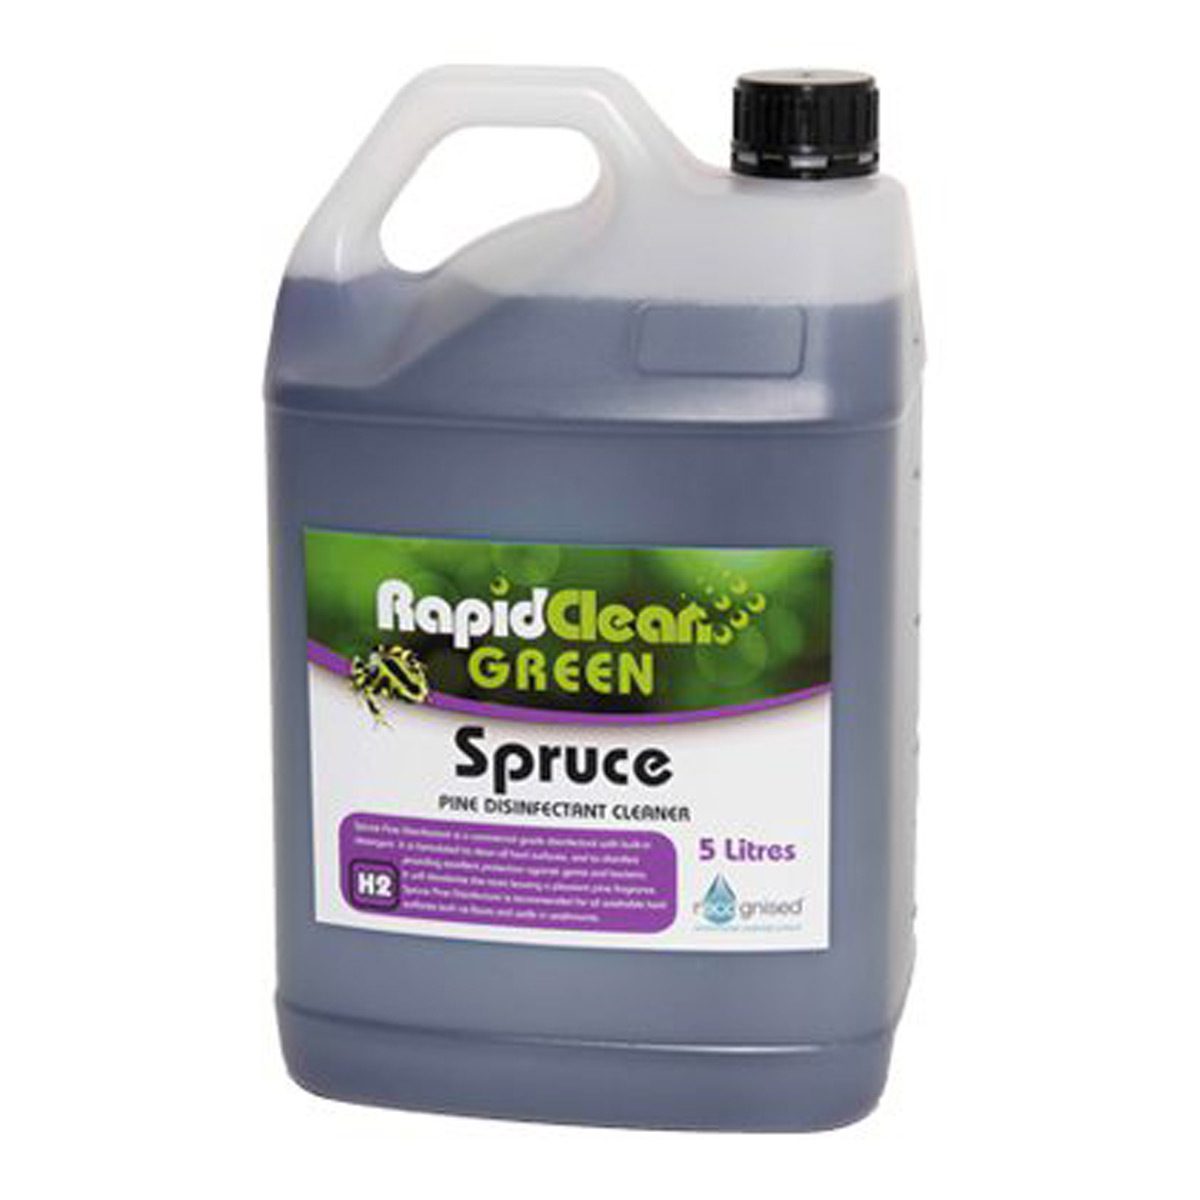 cleaning-products-disinfectants-and-sanitisers-rapidclean-spruce-pine-disinfectant-5L-litre-clean-disinfect-hard-surfaces-provide-protection-against-germs-bacteria-vjs-distributors-RAP140320